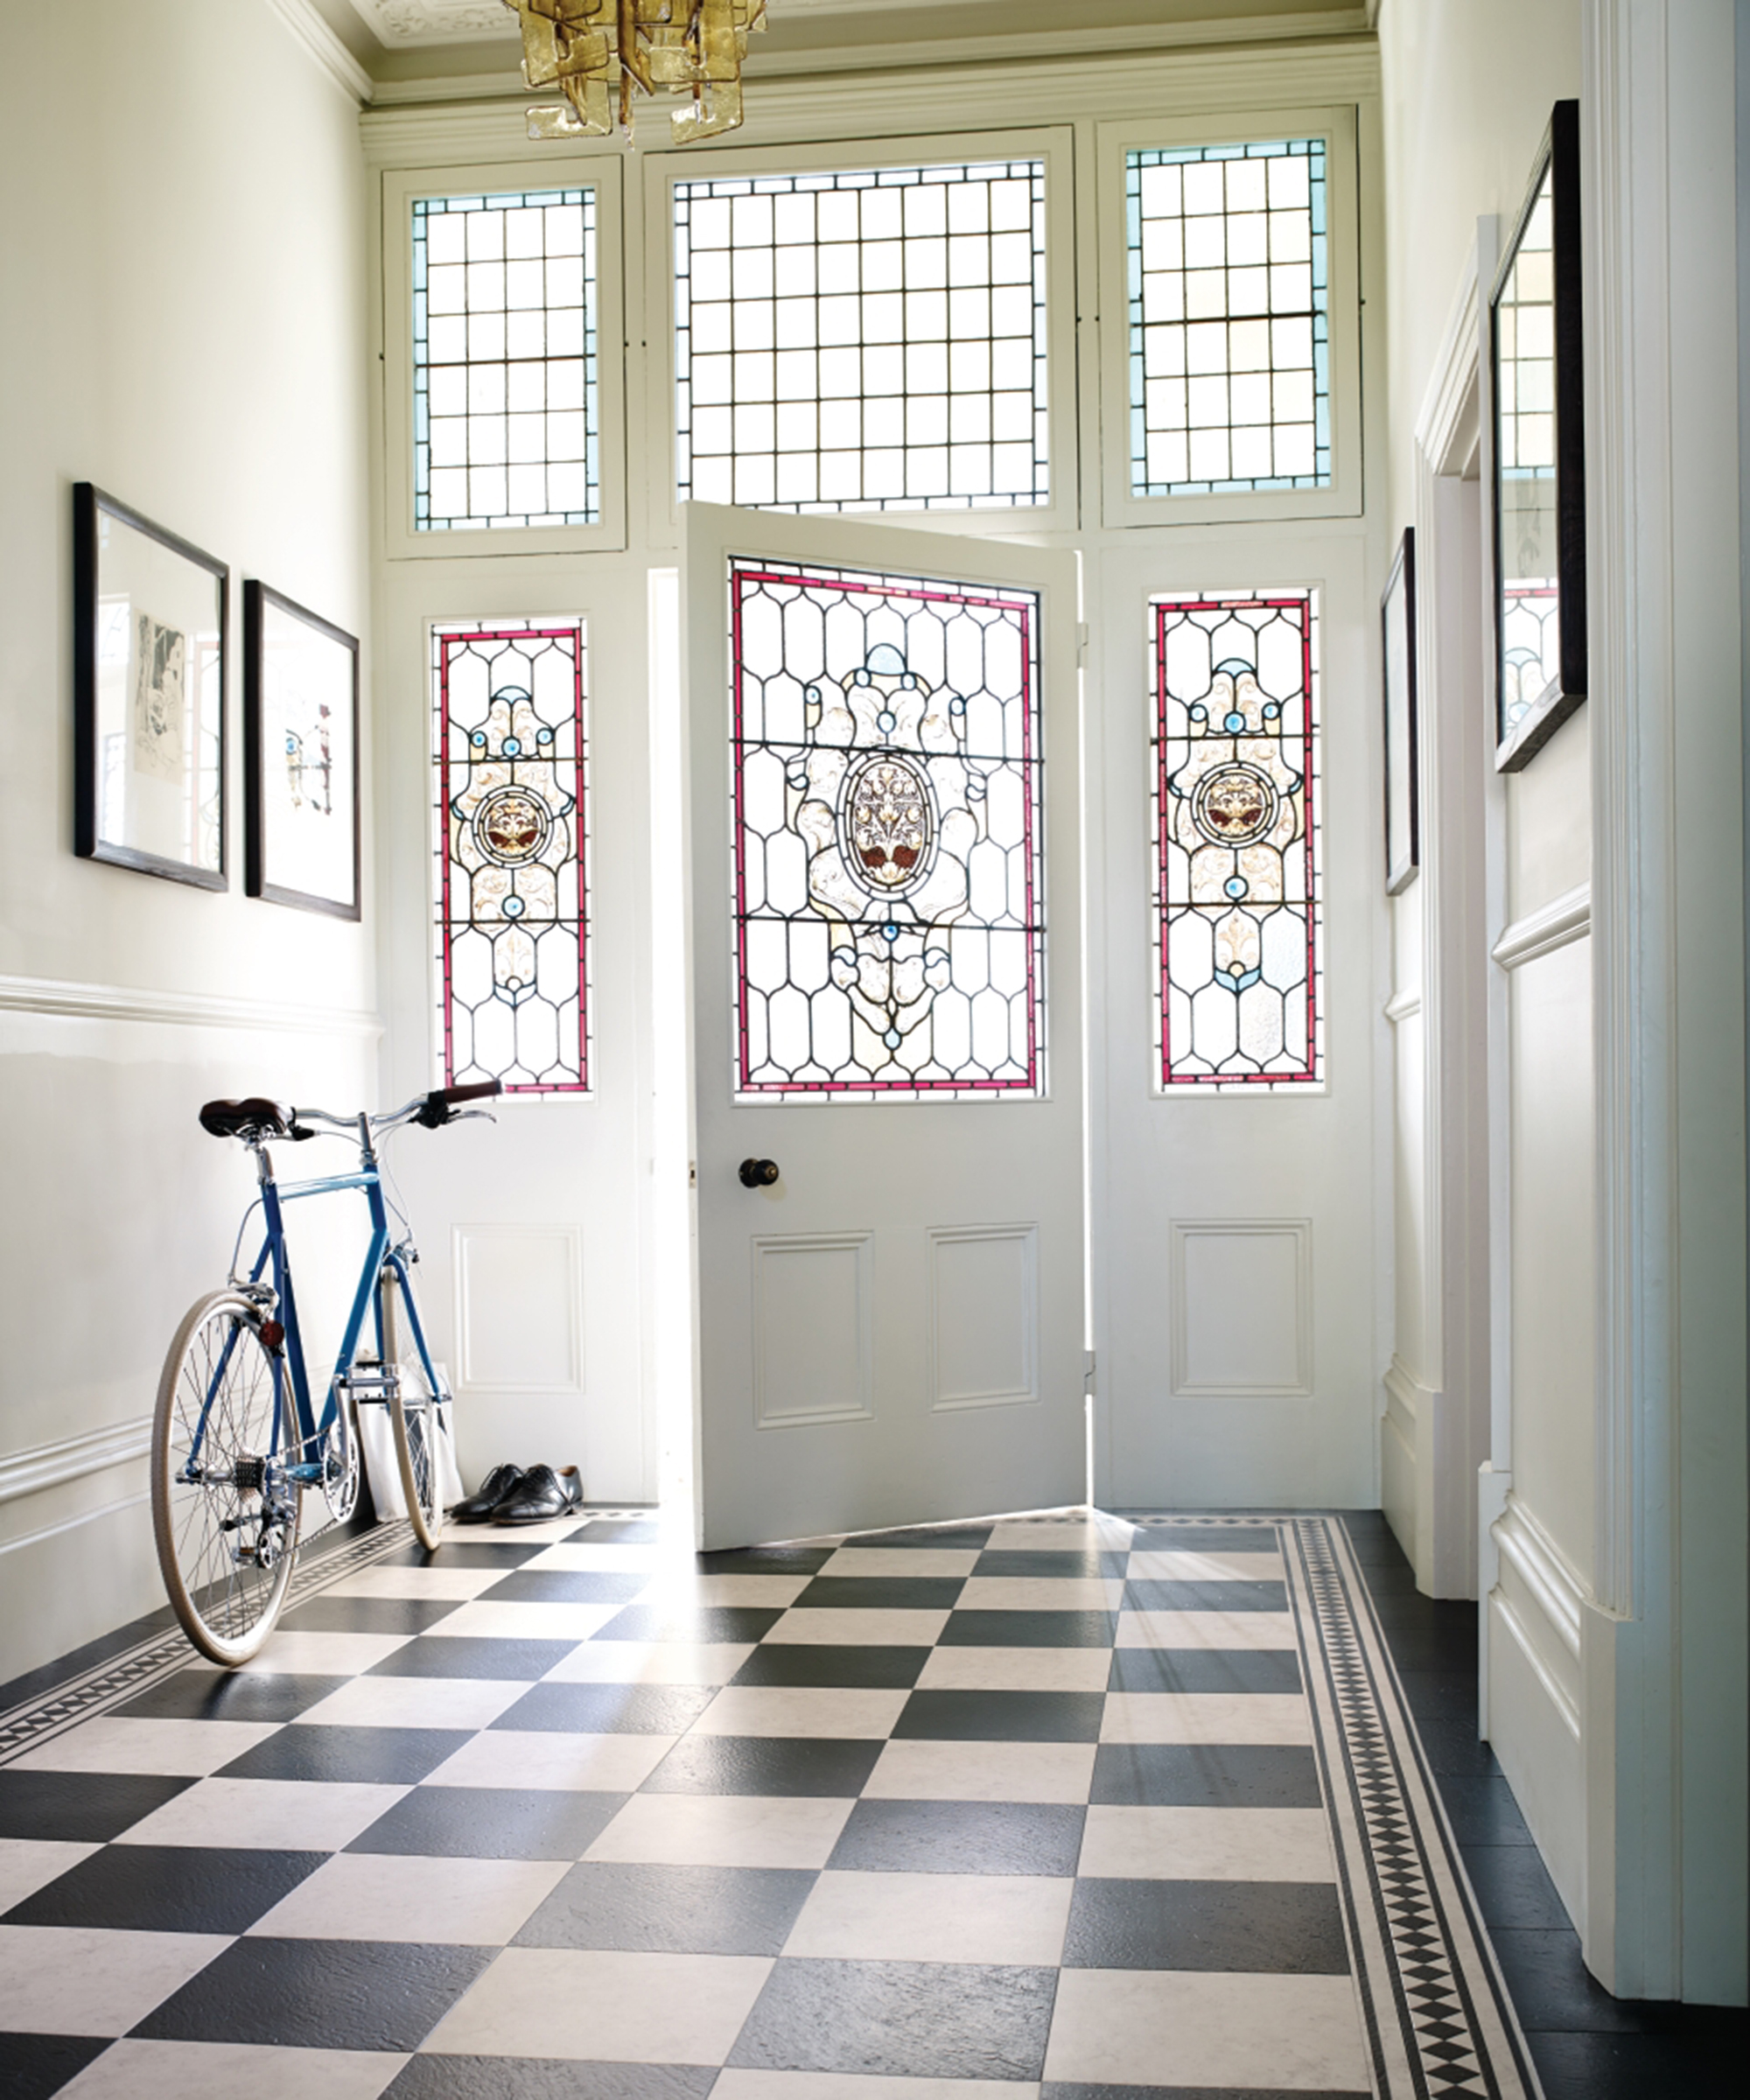 Hallway ideas by Amtico - Checkerboard flooring with stain glassed window doors and bicycle